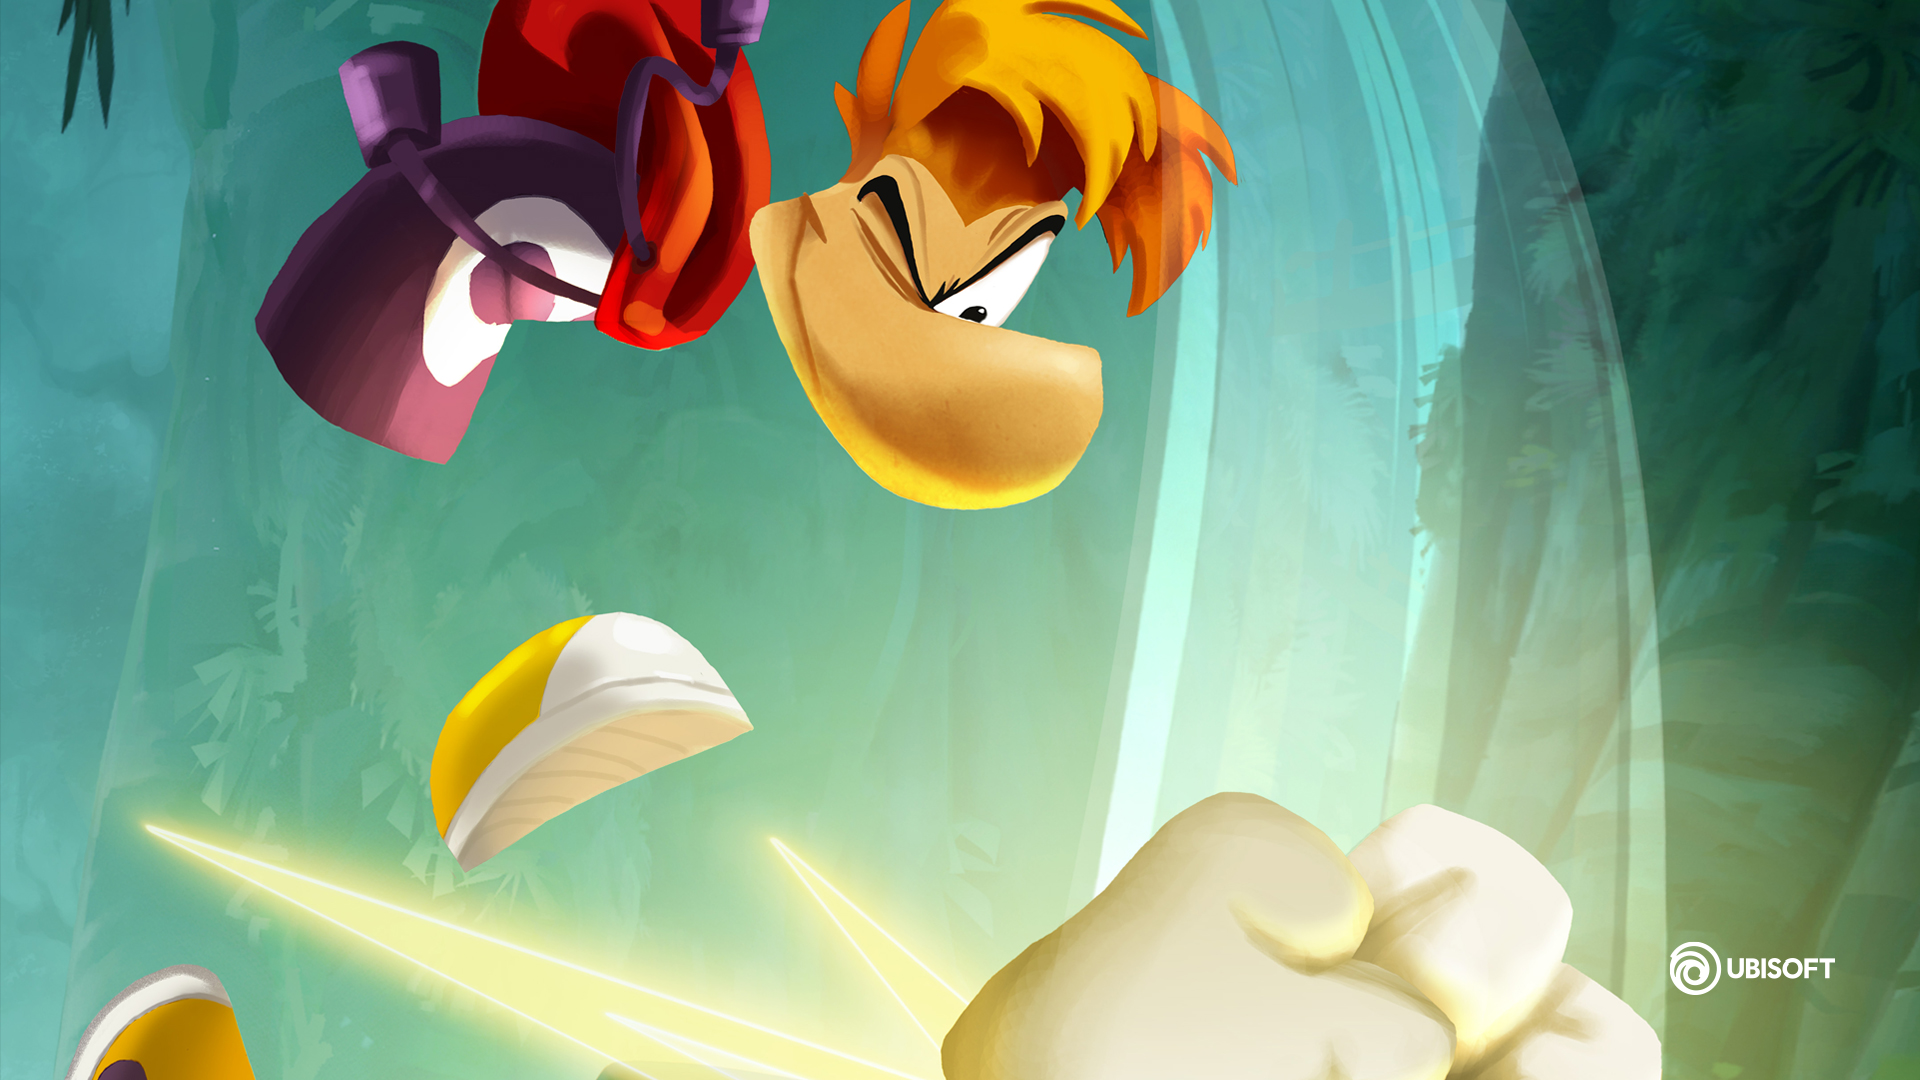 General 1920x1080 Ubisoft video games Rayman video game characters